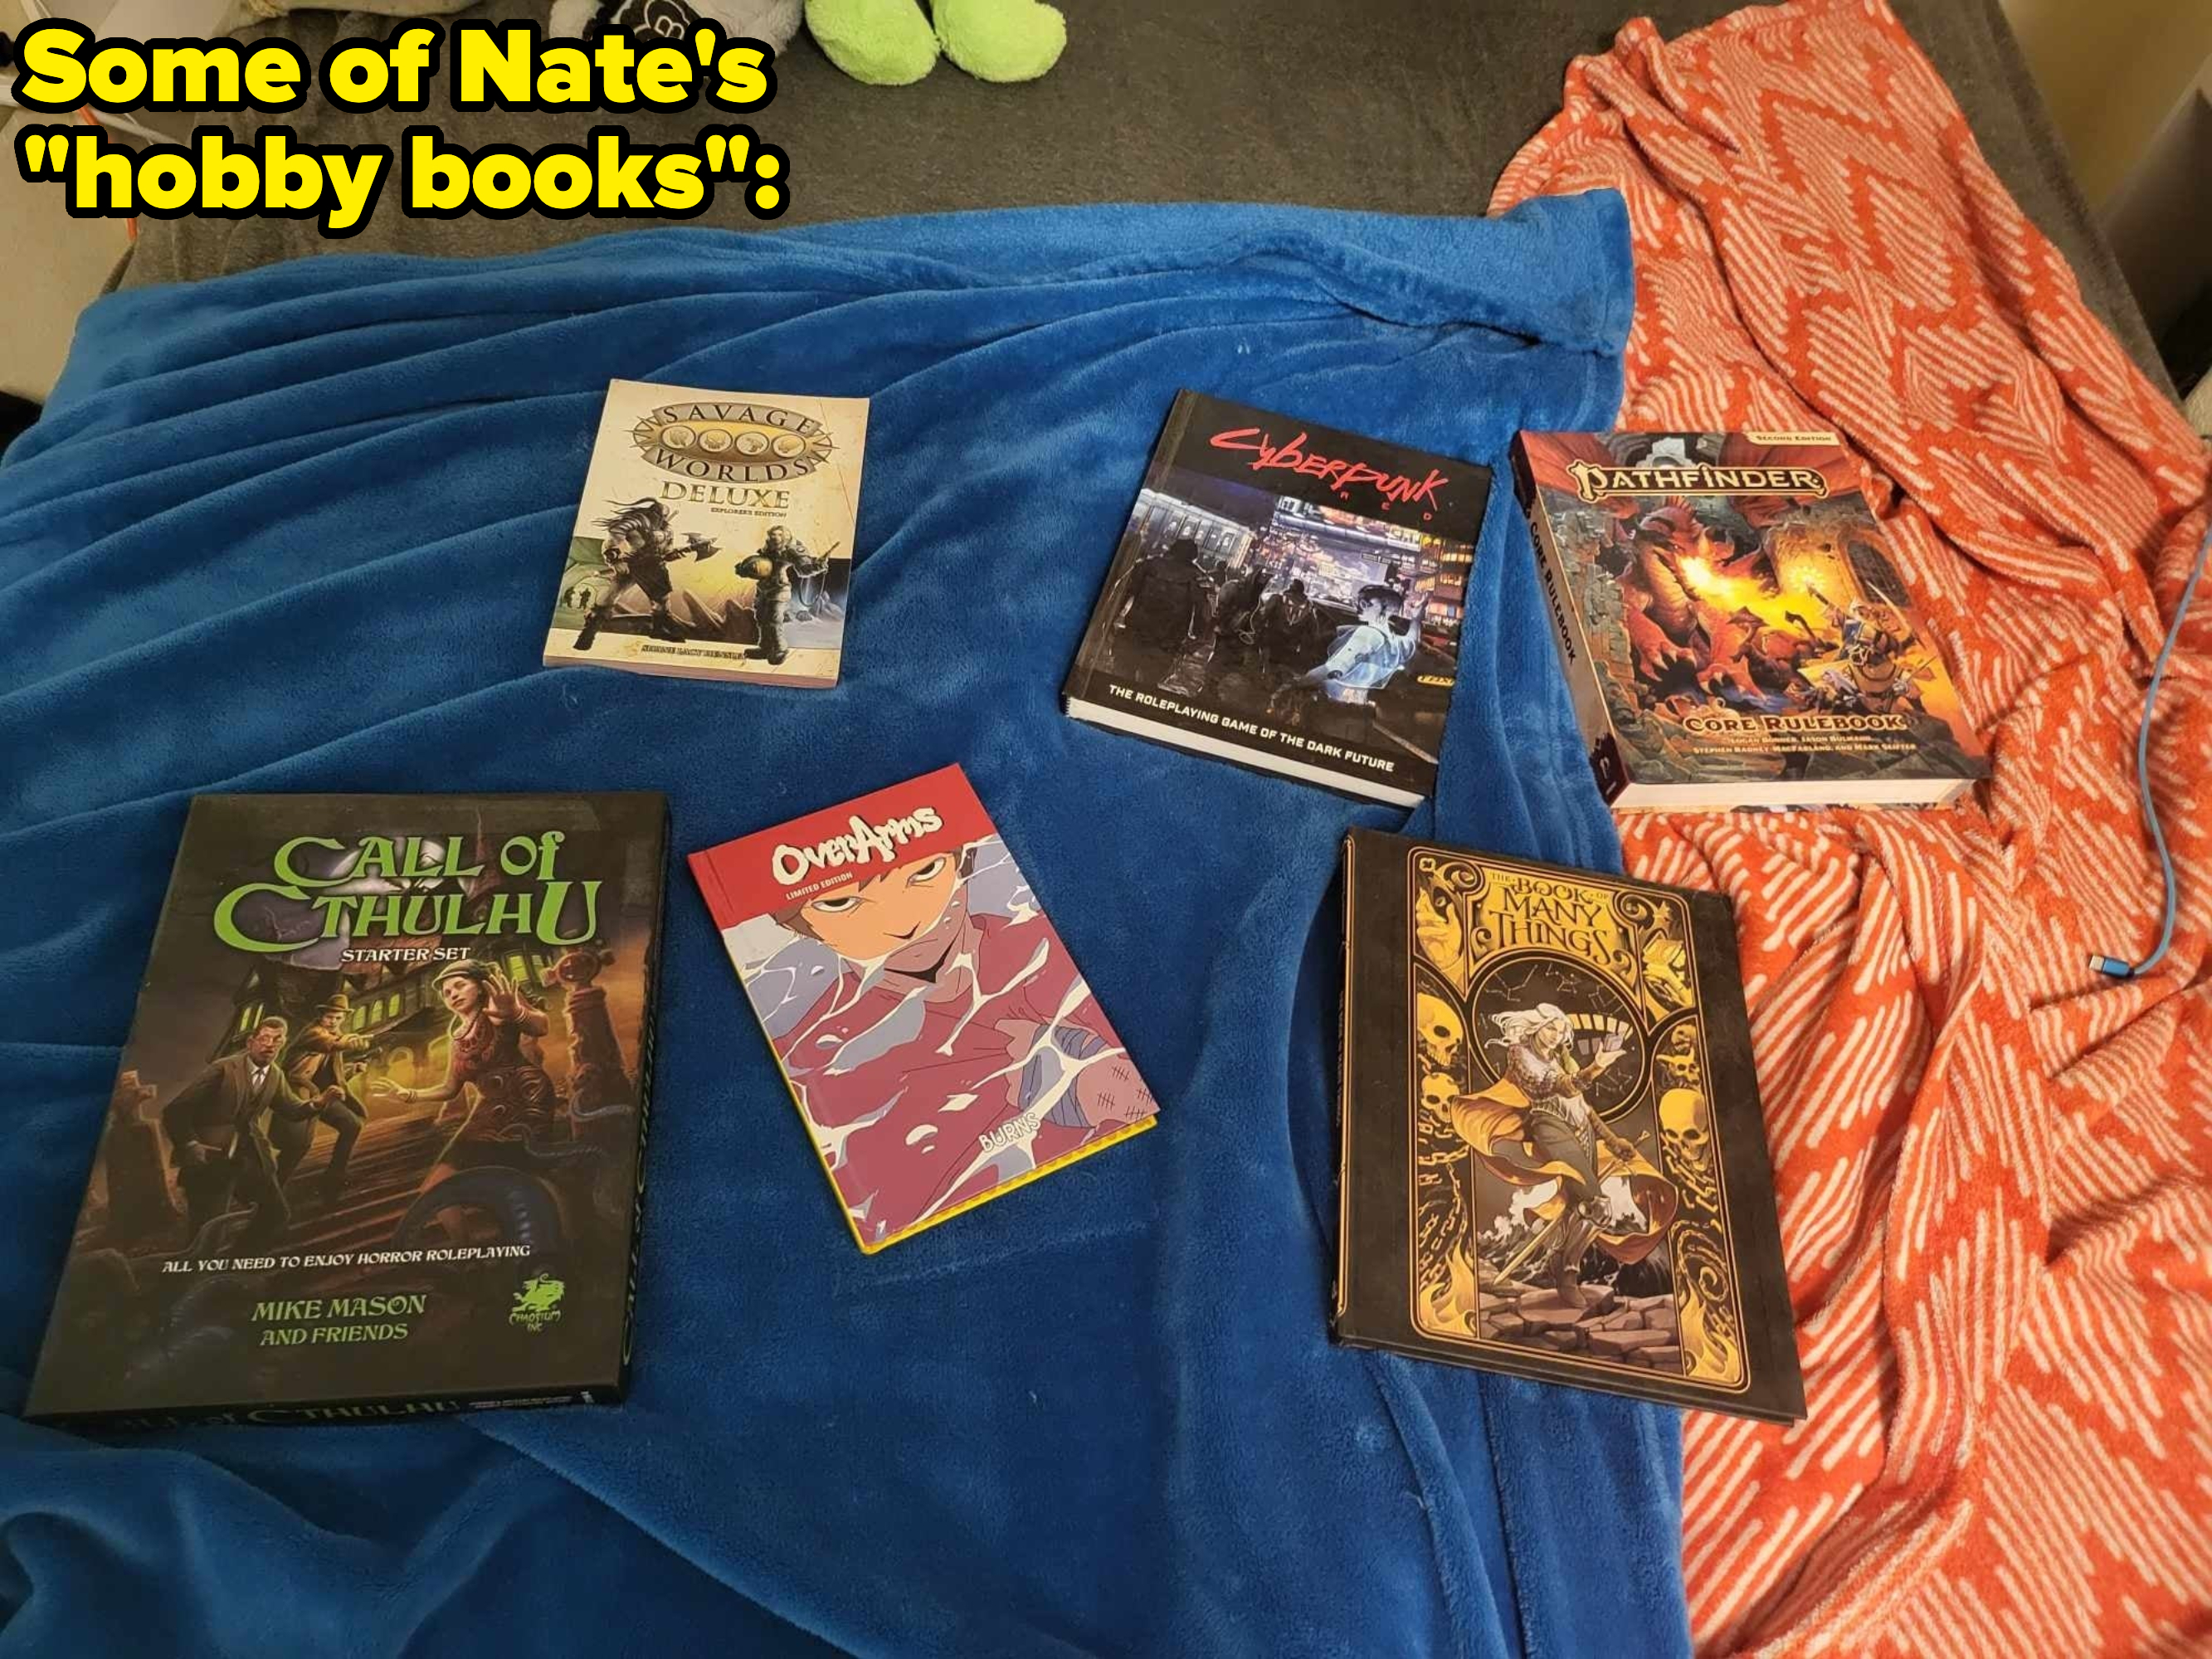 Assorted role-playing game books spread out on a blue blanket beside a red patterned shirt